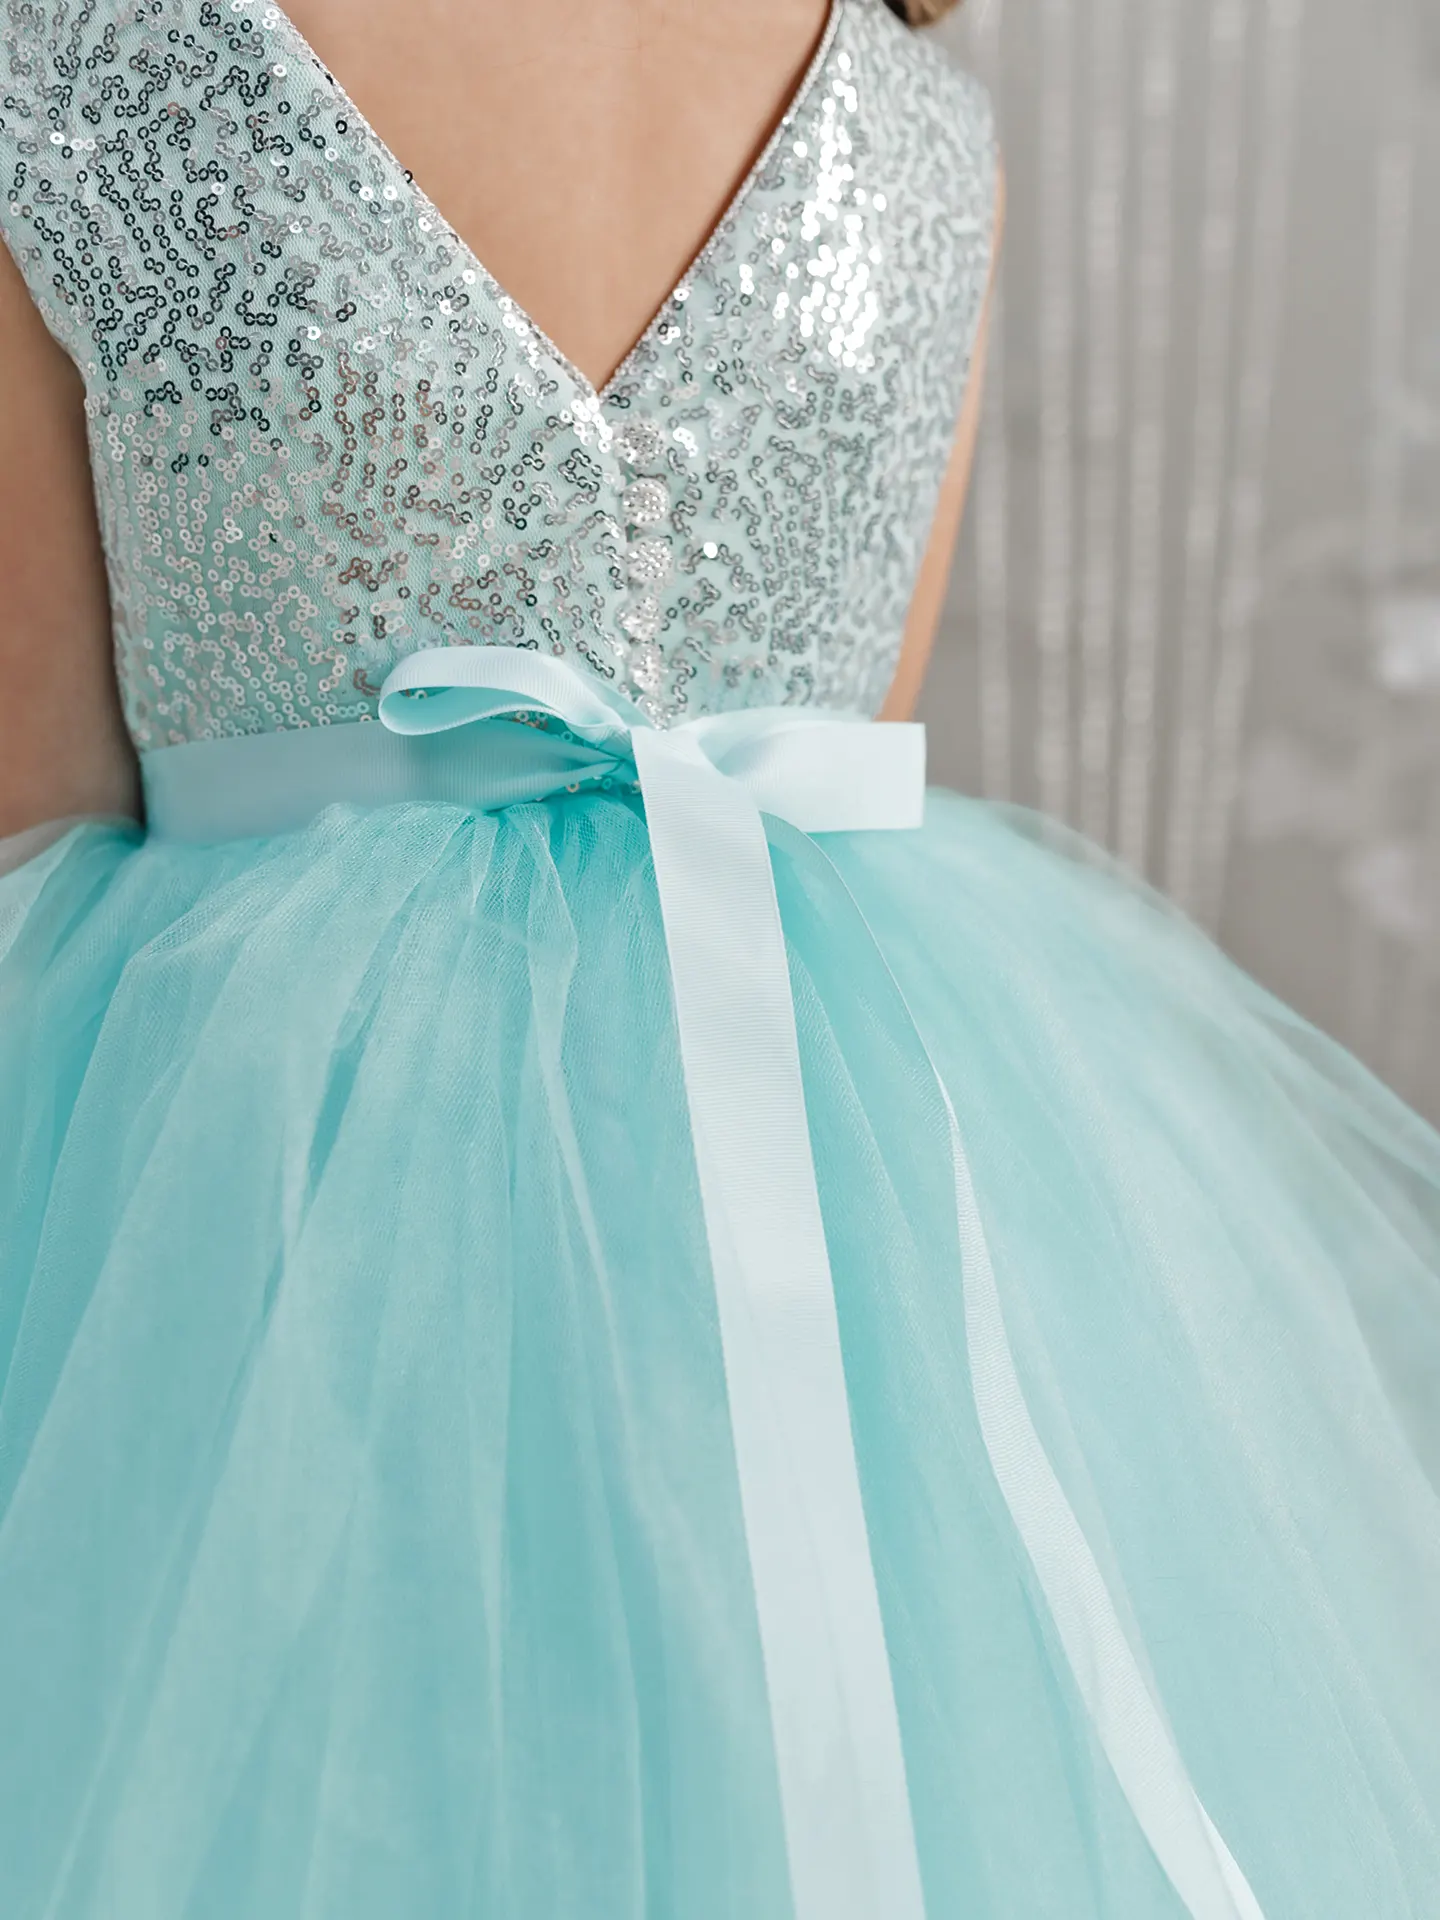 Comfortable Tutu girl's dress for a special occasion